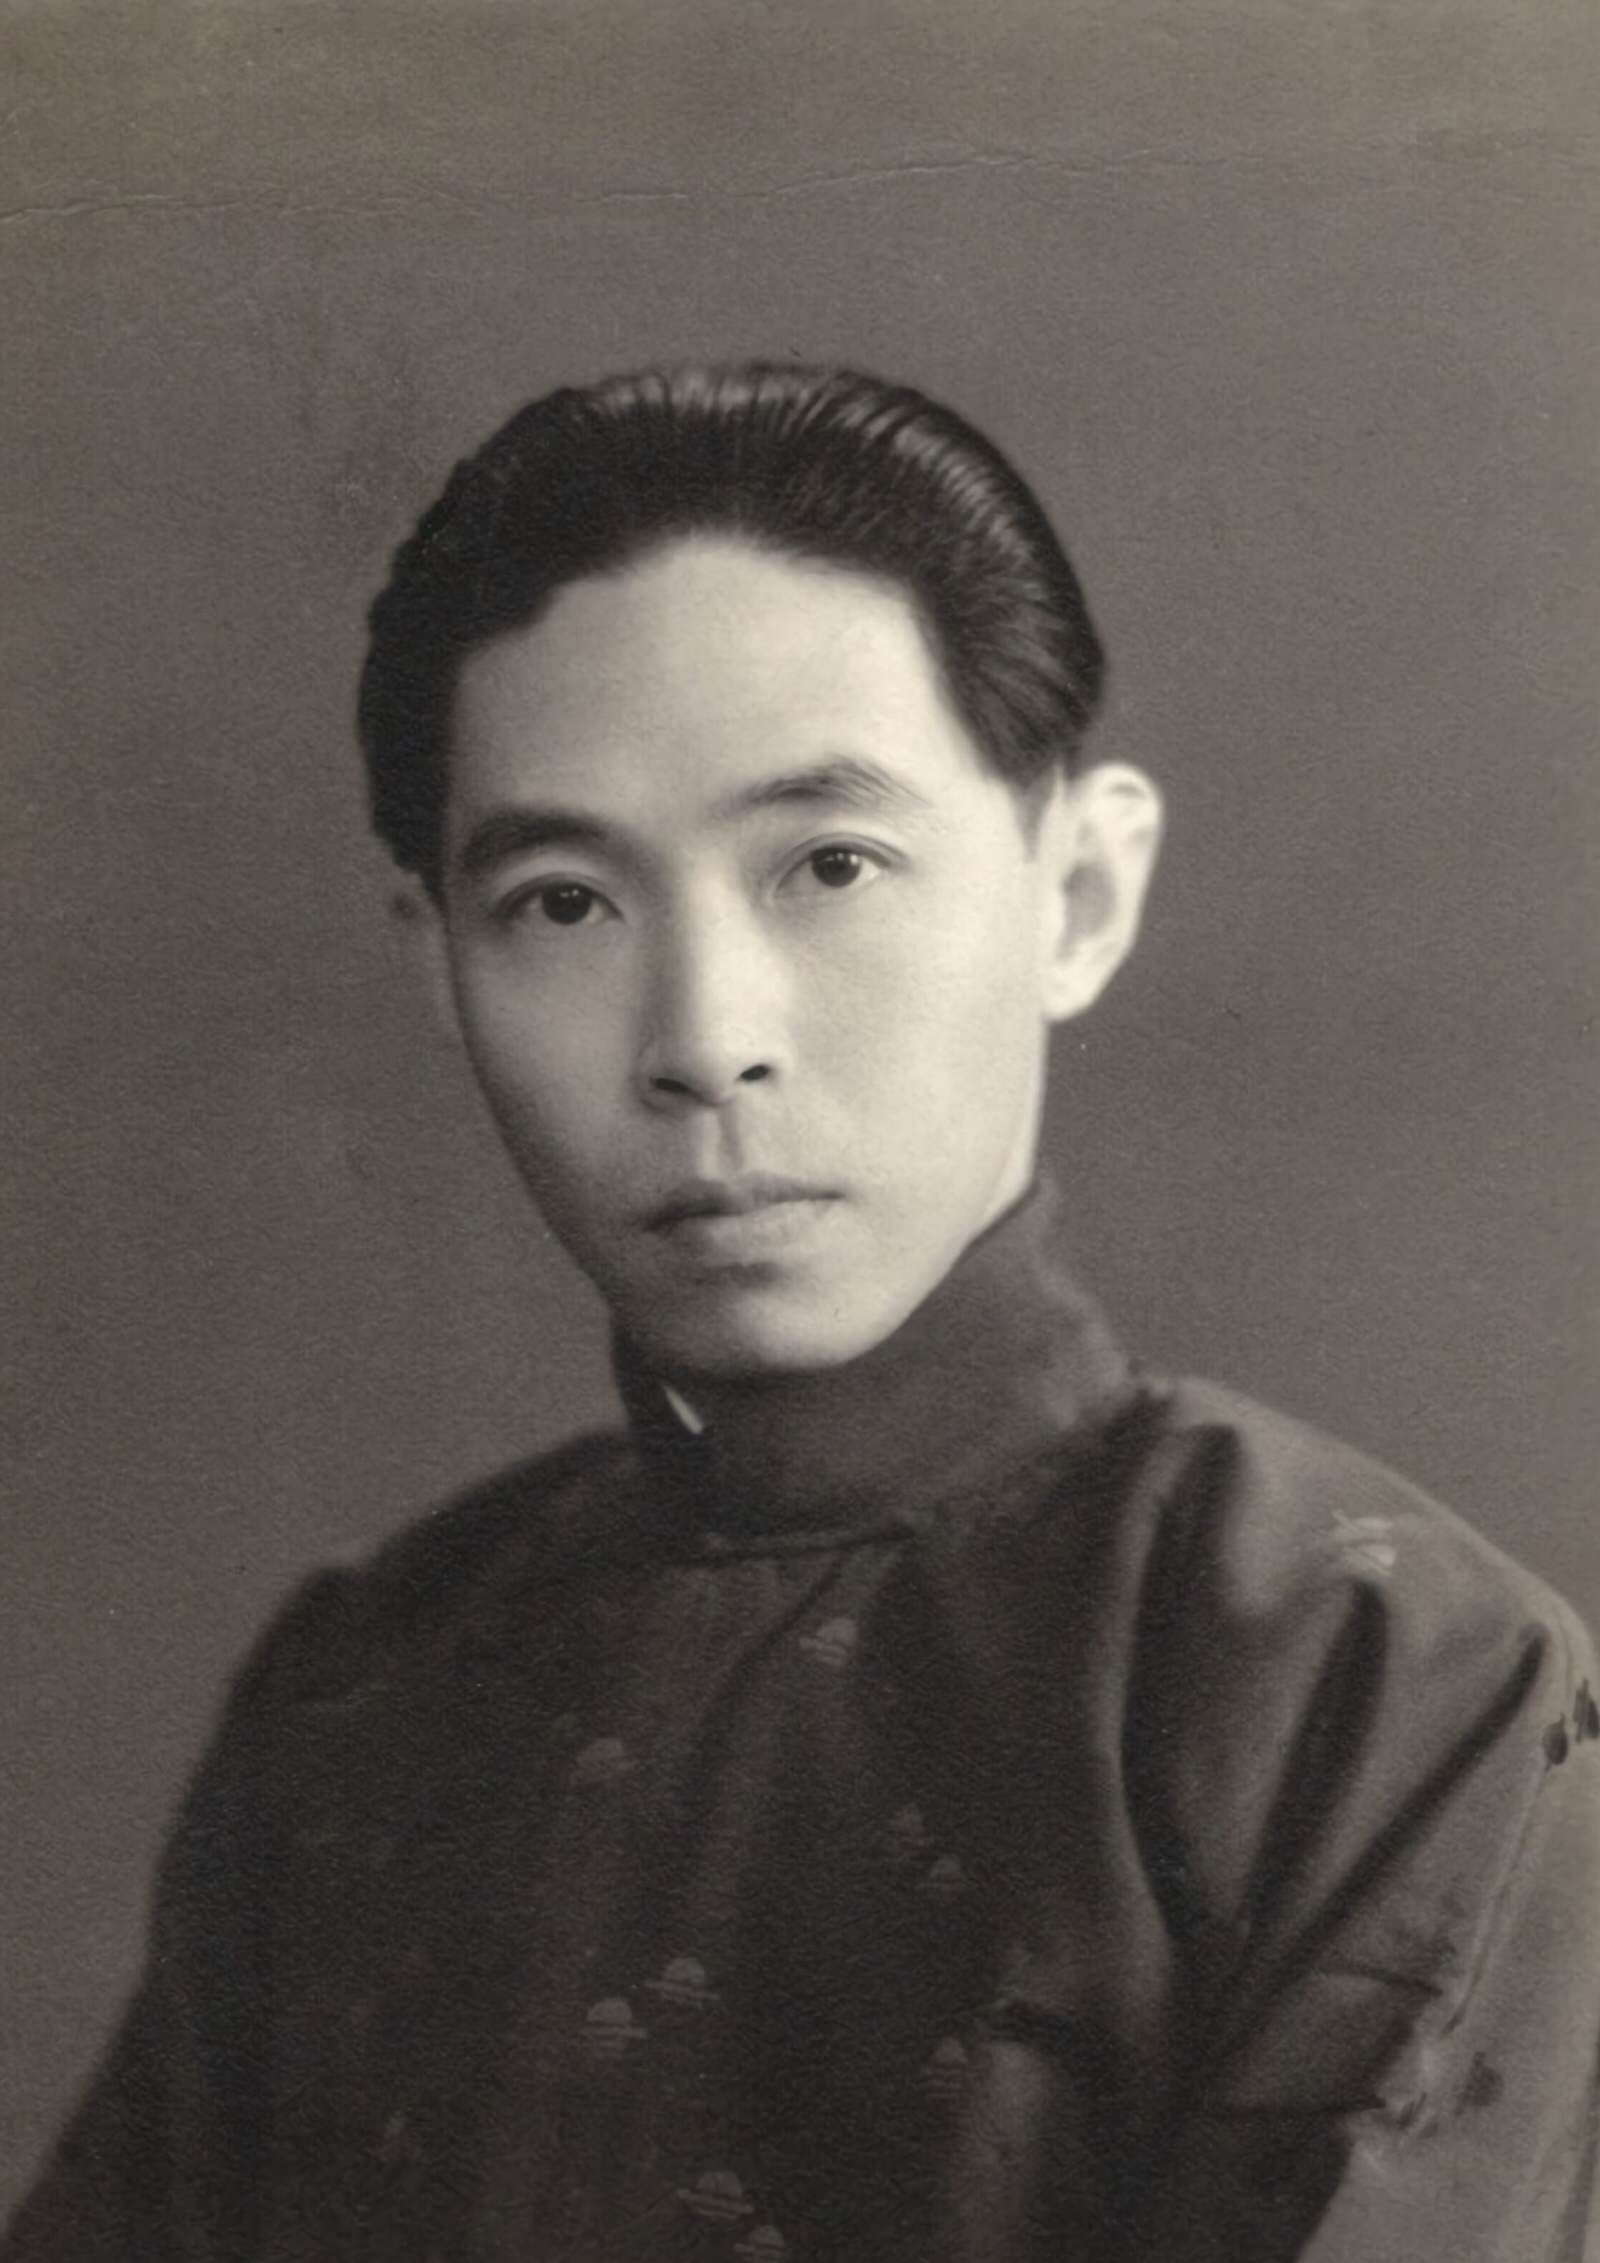 Mao Tun (Mao Dun), one of the most noted novelists of modern China. 1937-1940